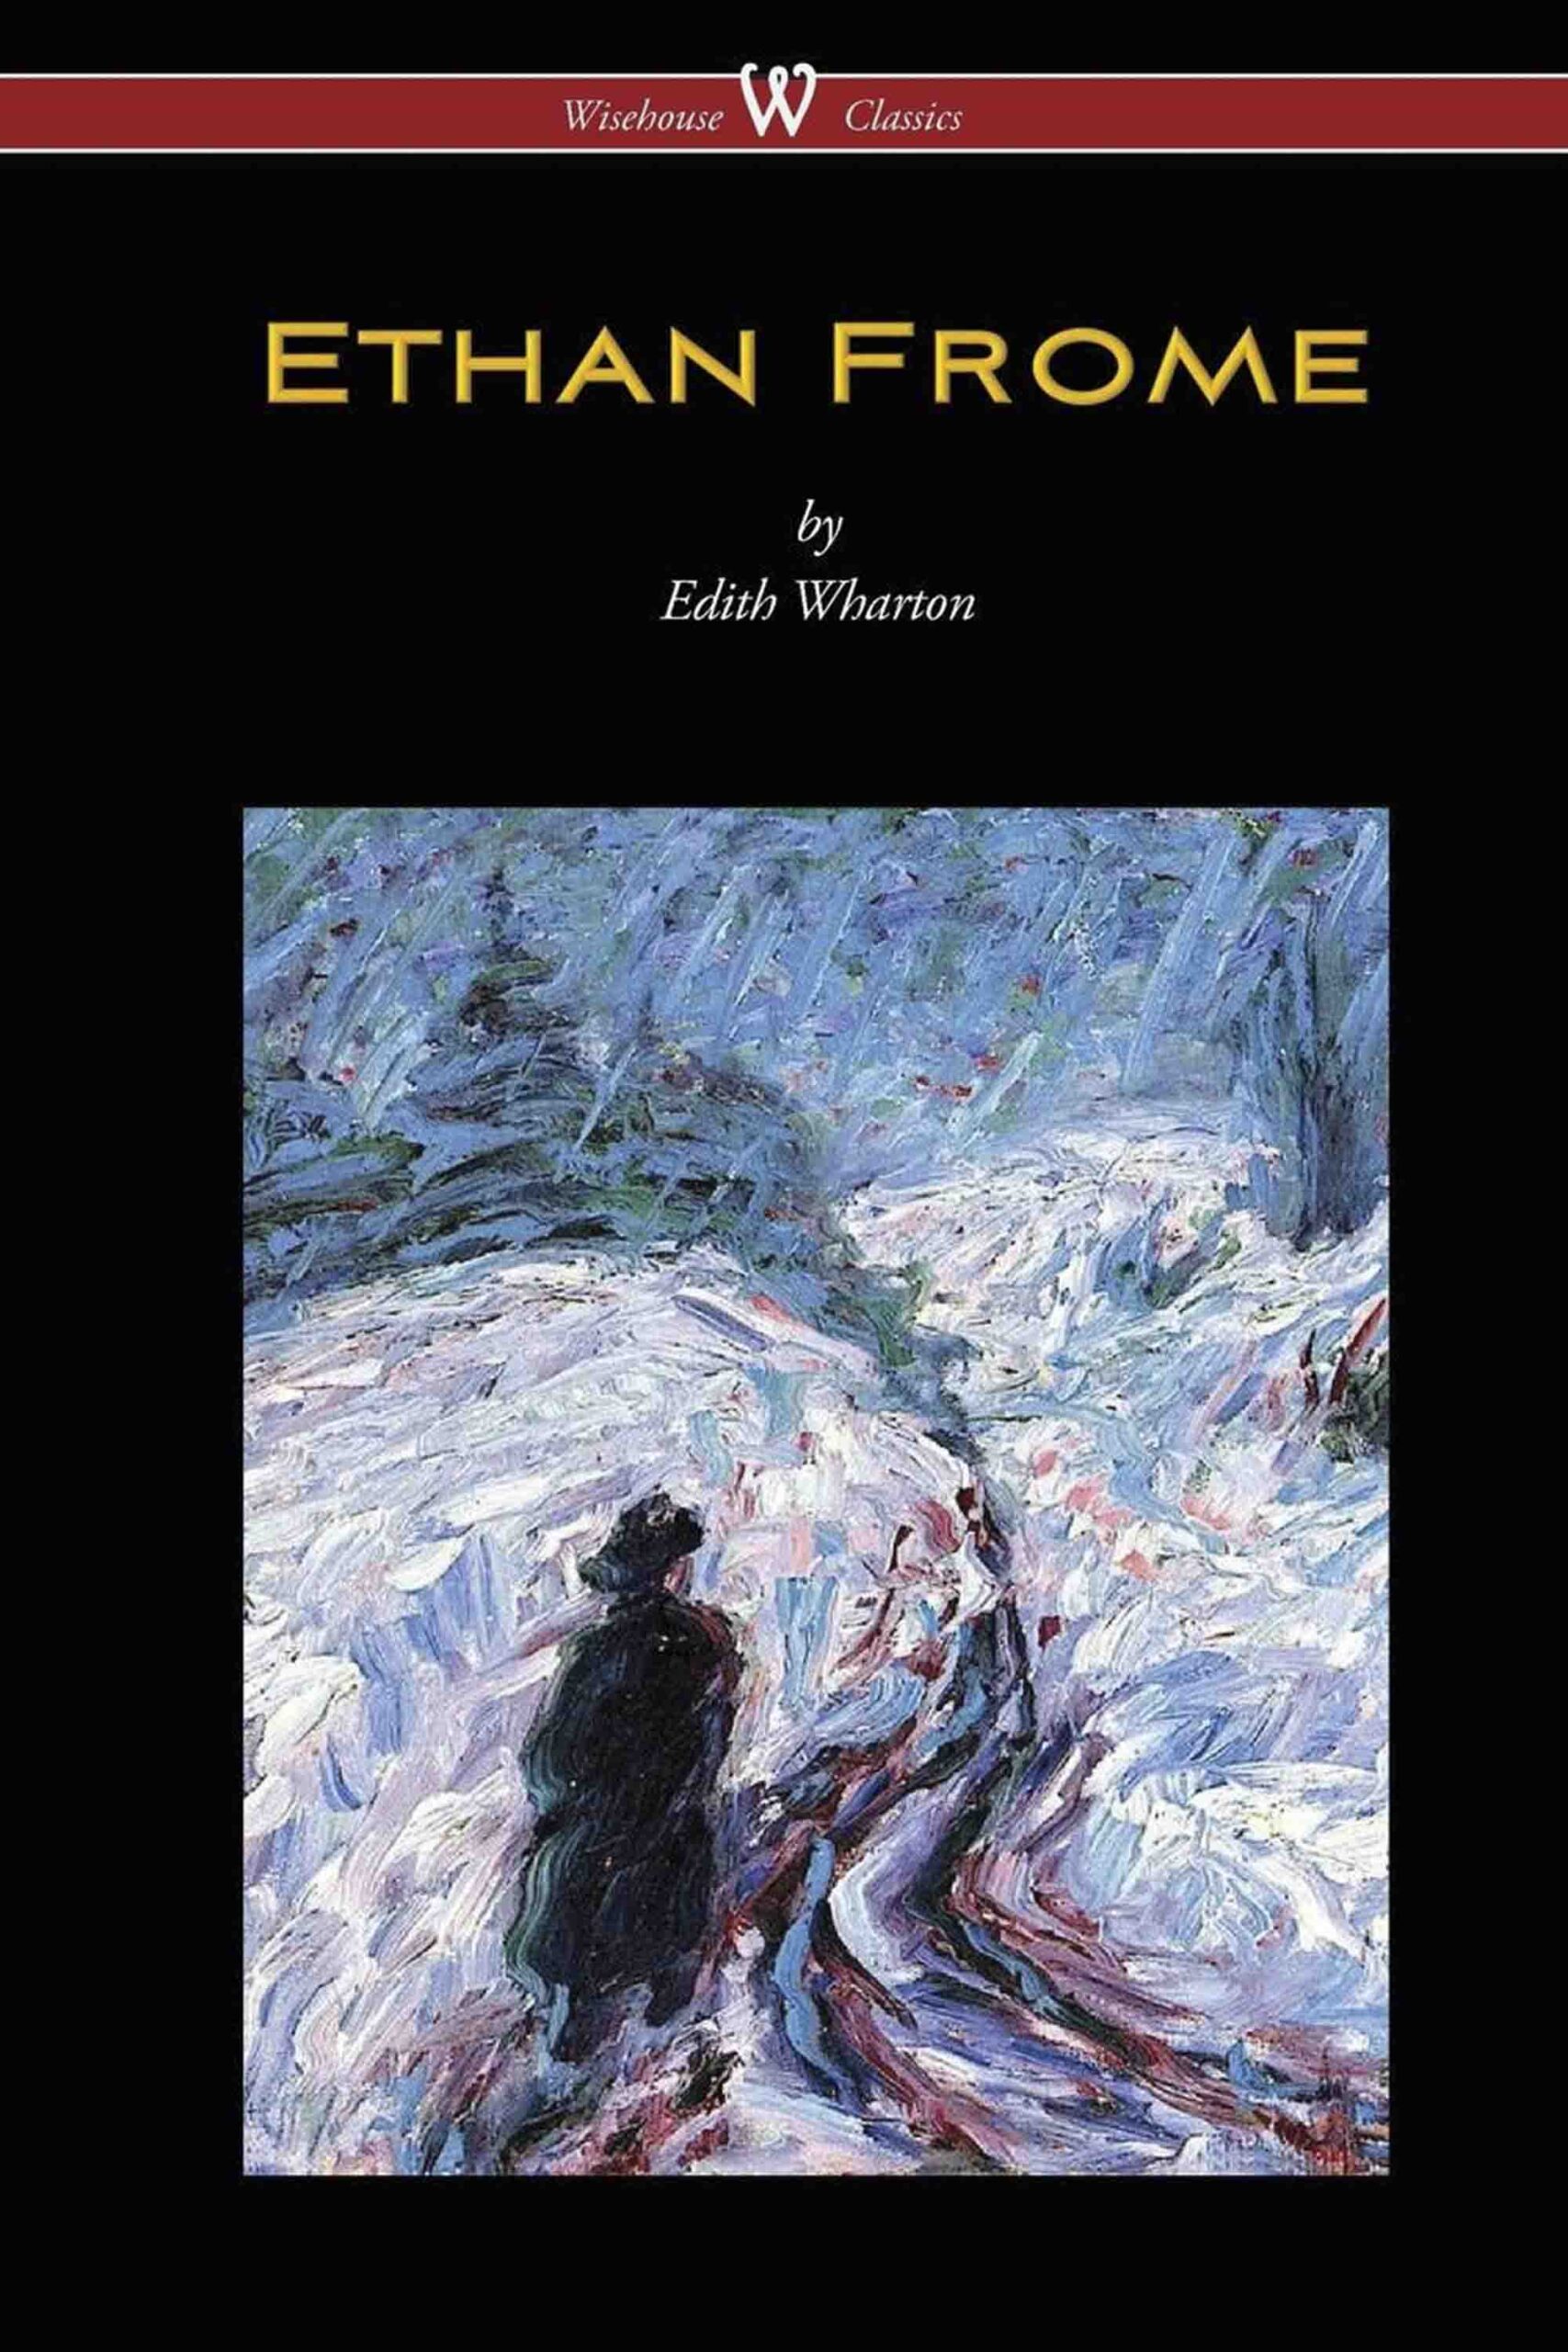 Ethan Frome (Wisehouse Classics Edition – With an Introduction by Edith Wharton)